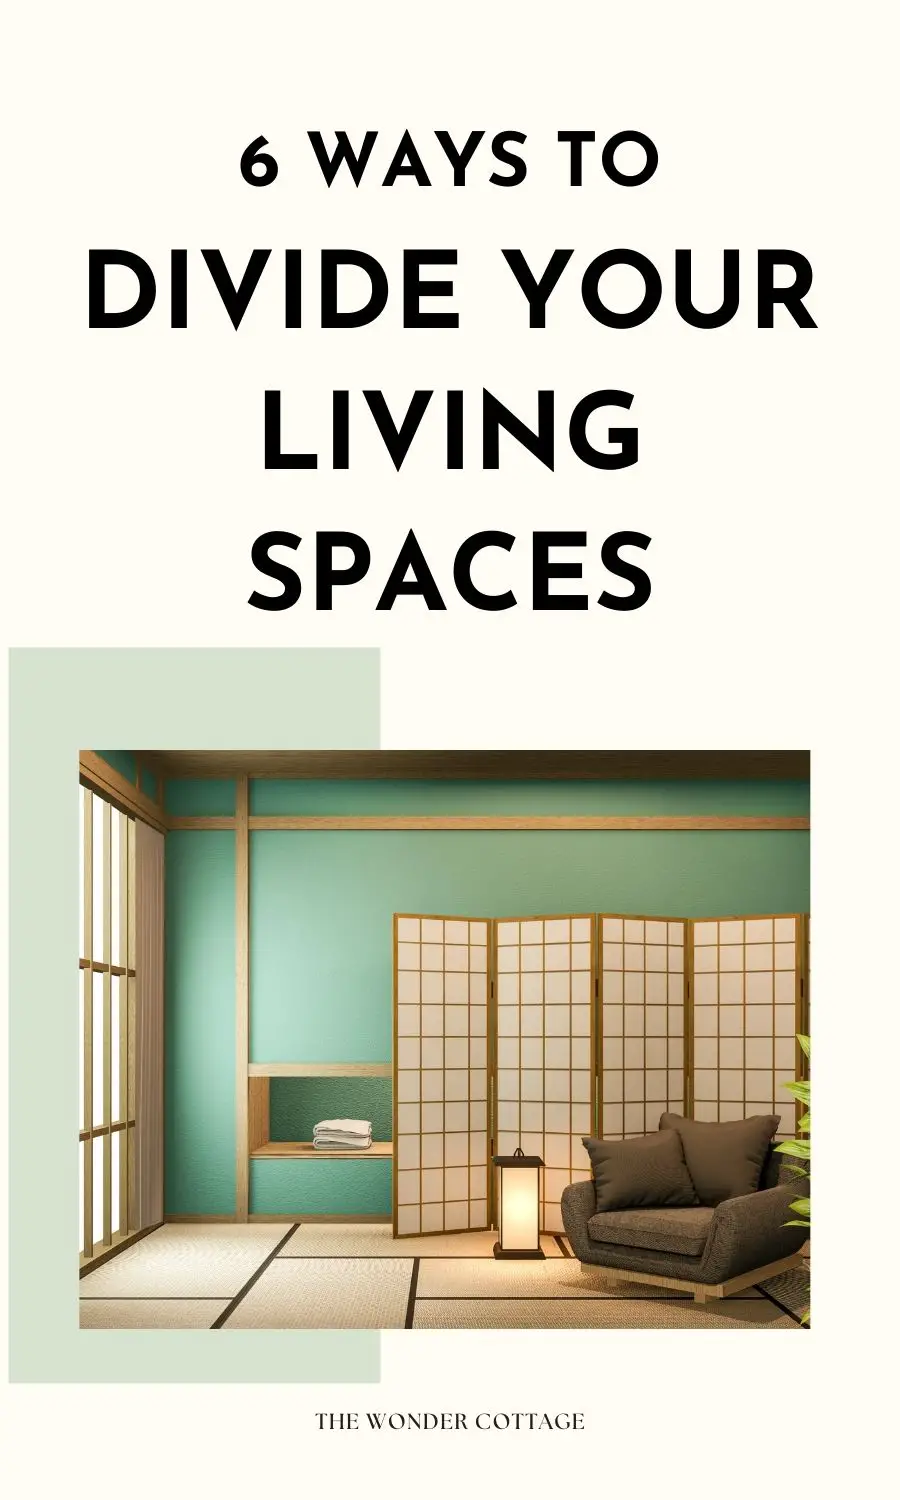 6 Ways To Divide Your Living Spaces
